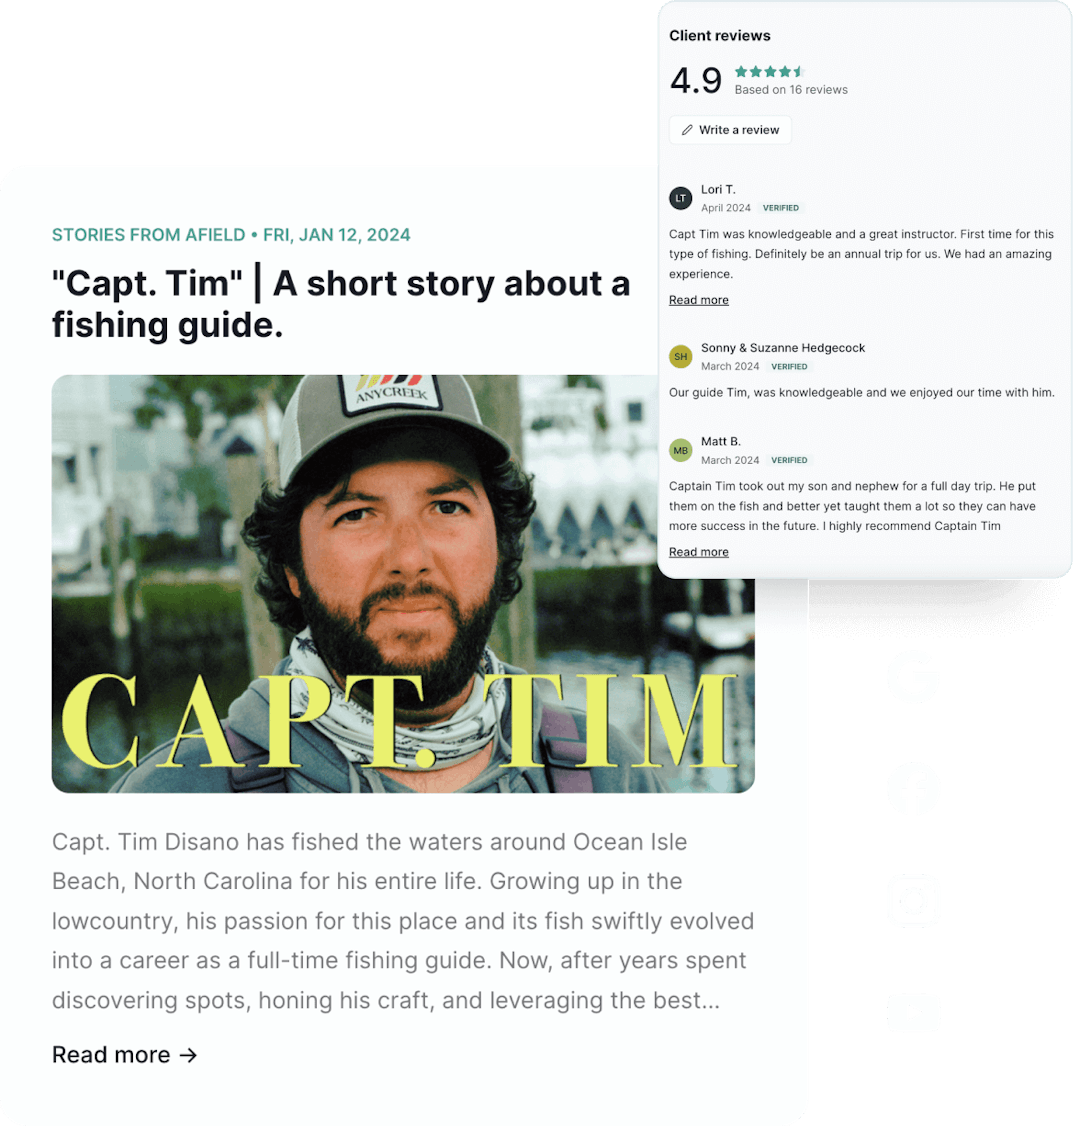 A collage featuring the Capt. Tim article, a guide's client reviews section, and social media logos